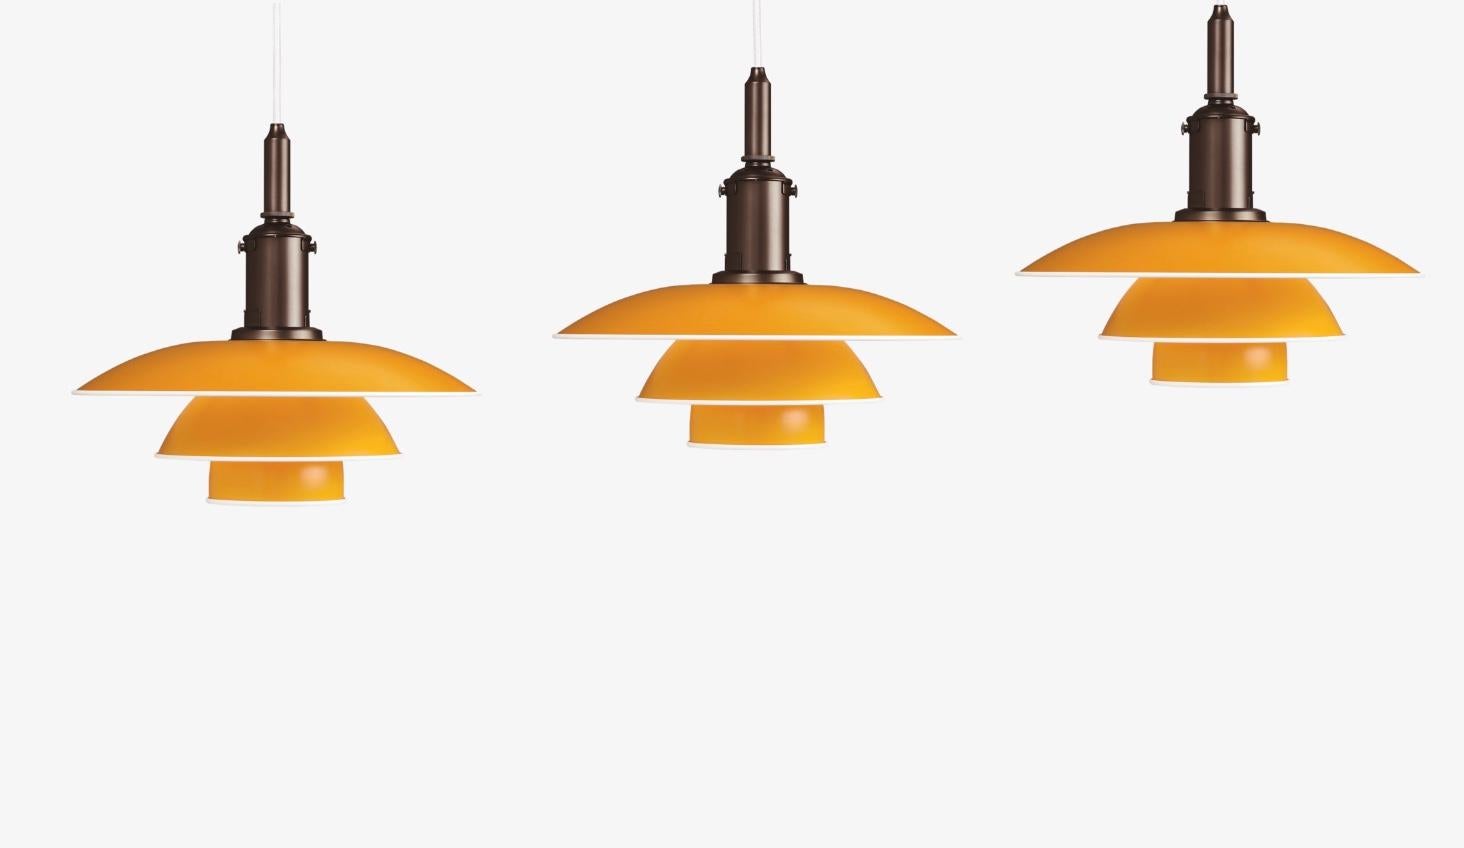 Poul Henningsen set of 3 PH 3½-3 pendants in yellow for Louis Poulsen. Denmark, New production.

The PH 3½-3 pendant is based on Poul Henningsen's original drawings from the late1920s and early 1930s, featuring his renowned three-shade system. The